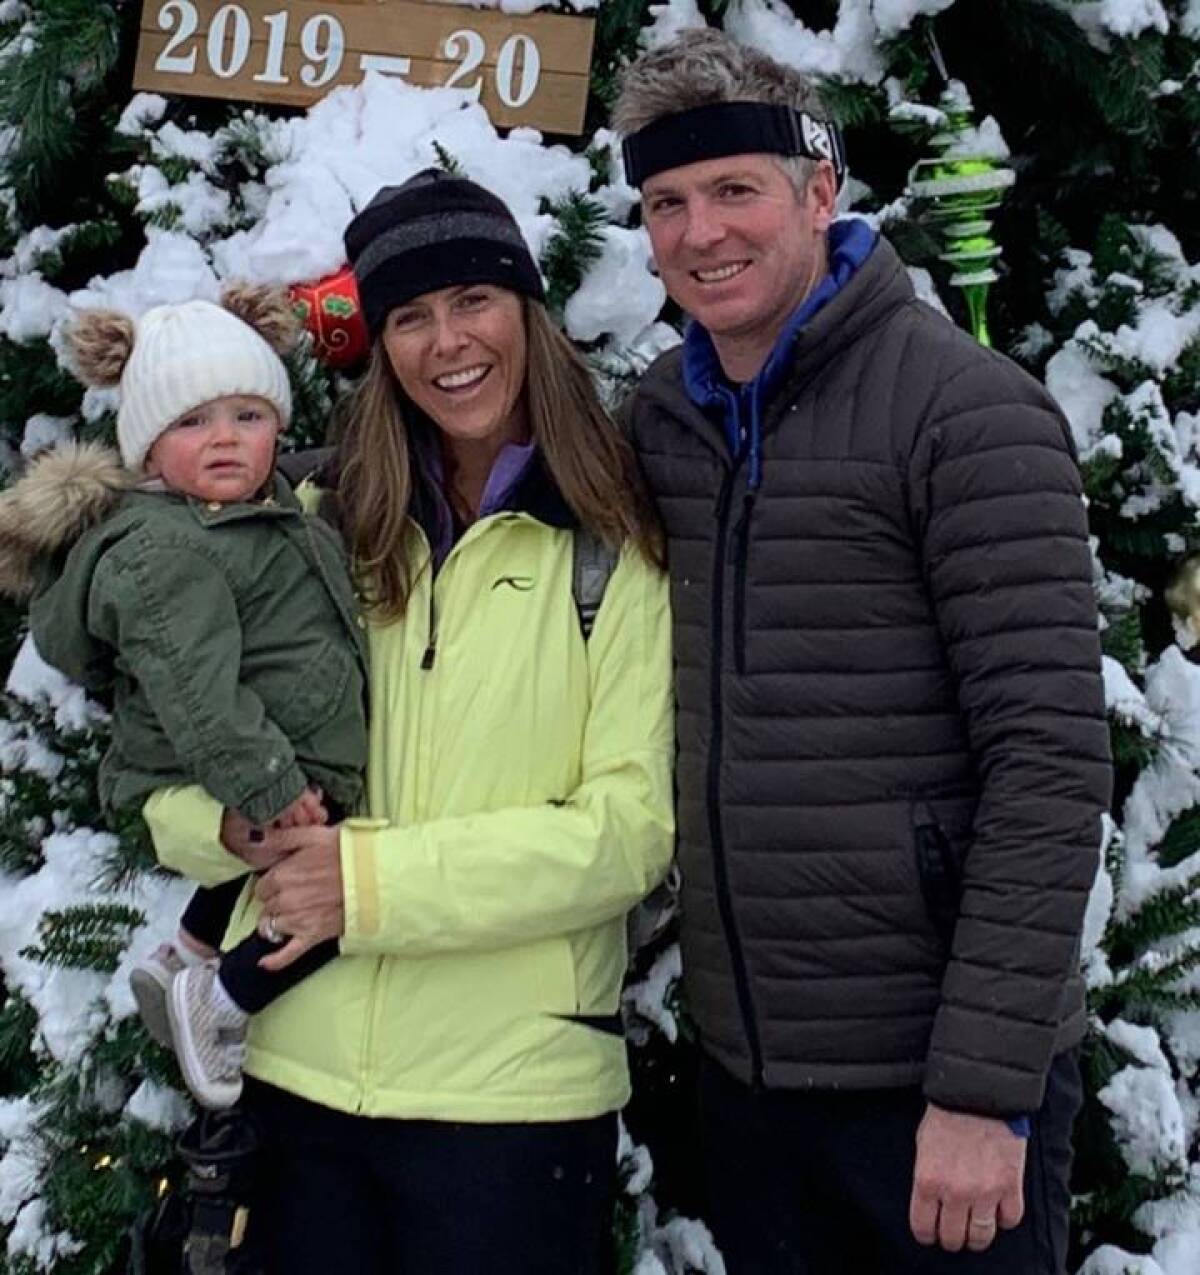 Lisa and Matt Bresnahan are pictured in 2019 with their daughter Madeline.